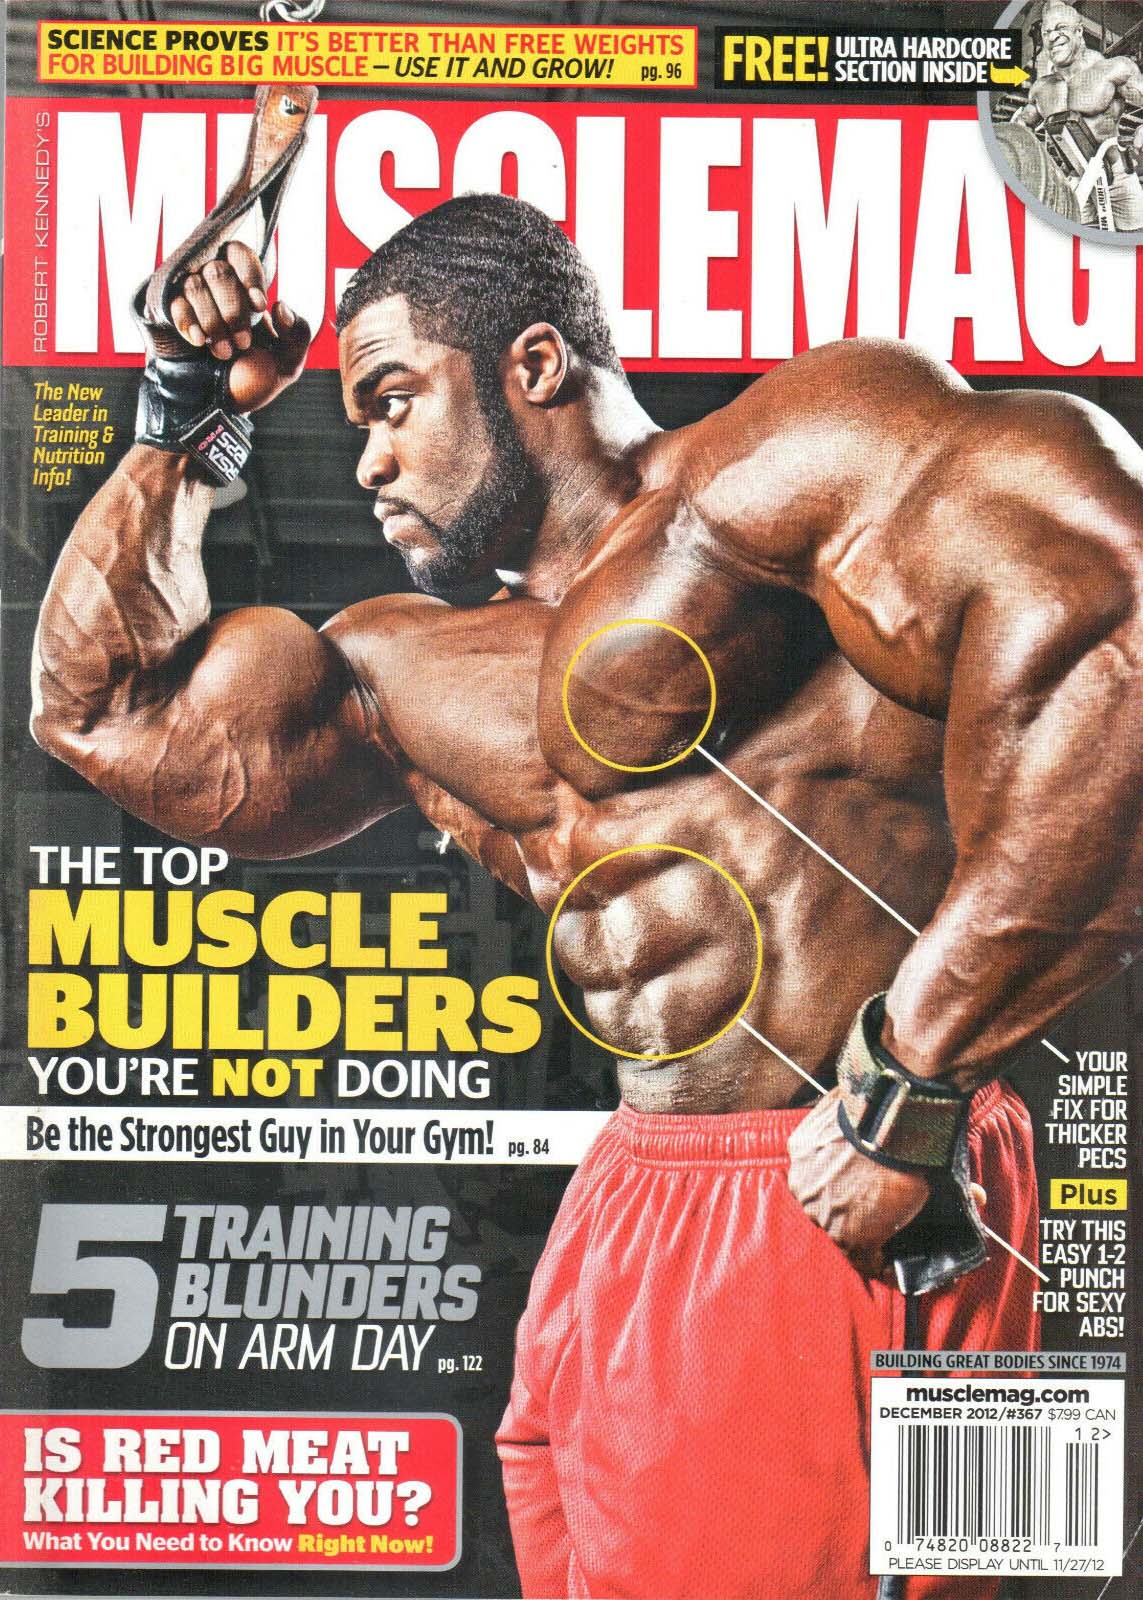 Muscle Mag December 2012 magazine back issue Muscle Mag magizine back copy Muscle Mag December 2012 Bodybuilding and Fitness Magazine Back Issue Published by Canadian Robert Kennedy and Founded in 1974. Science Proves It's Better Than Free Weights For Building Big Muscle - Use It And Grow!.